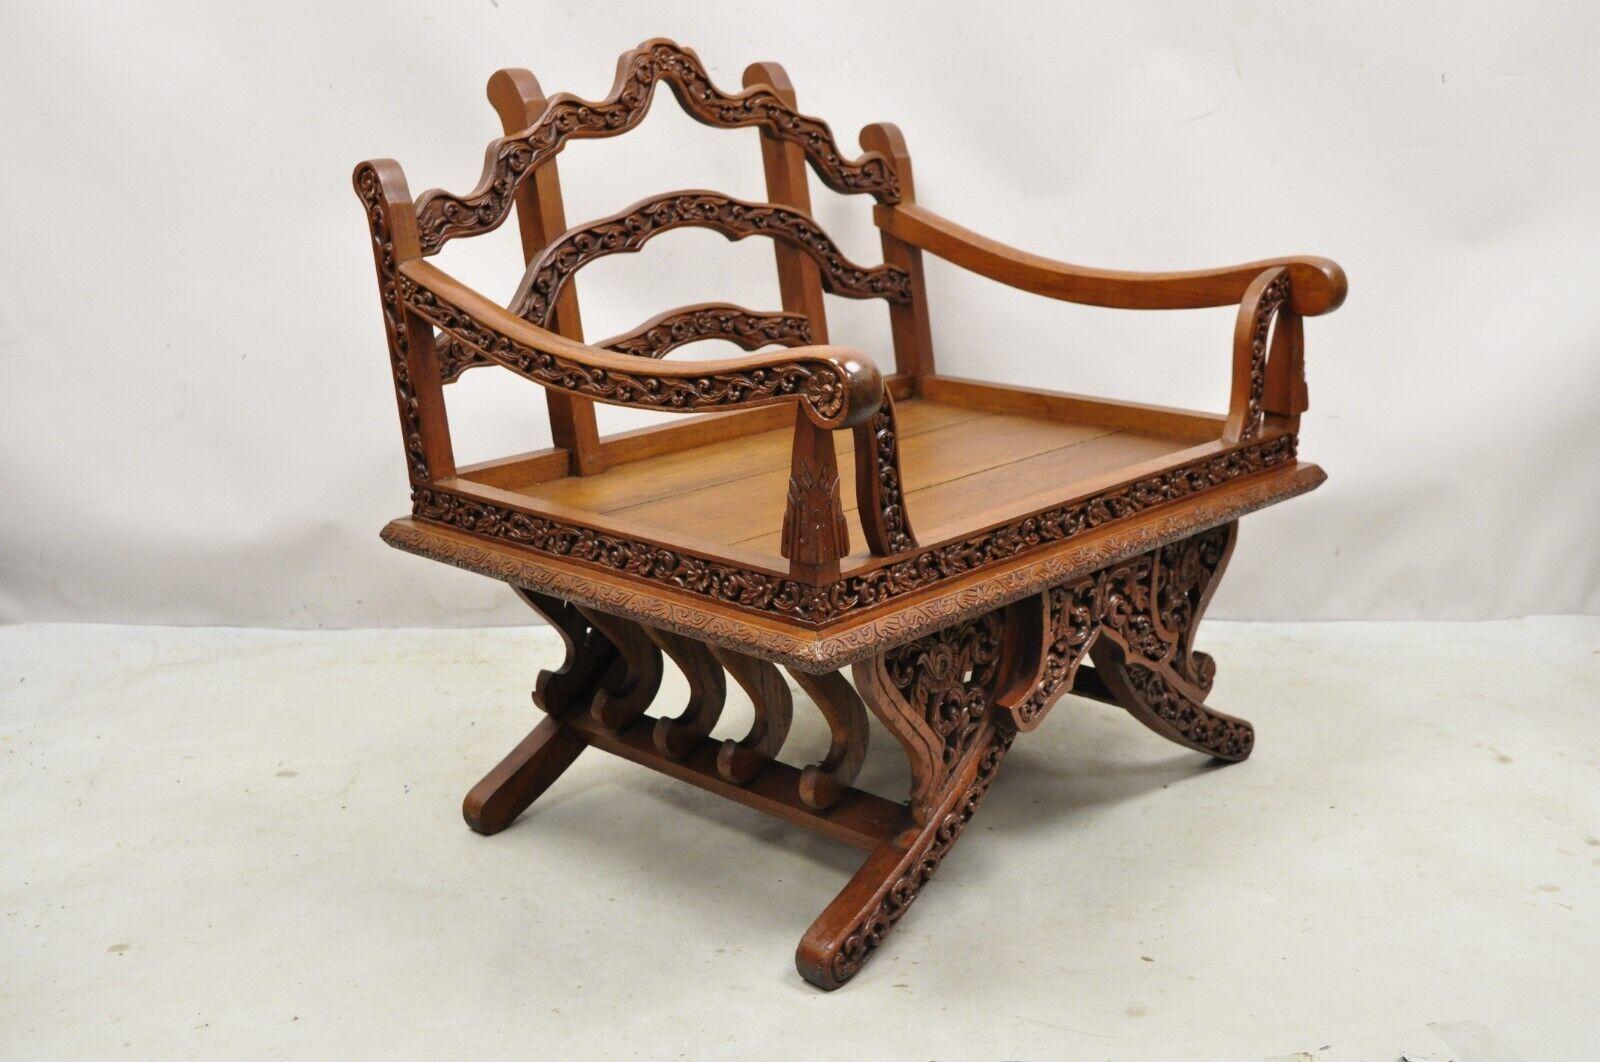 Vintage Chinoiserie Carved Teak Wood Howdah Elephant Saddle Accent Chair. Item features solid wood construction, nicely carved details, very nice vintage item, great style and form. Circa Late 20th Century. Measurements: 33.25